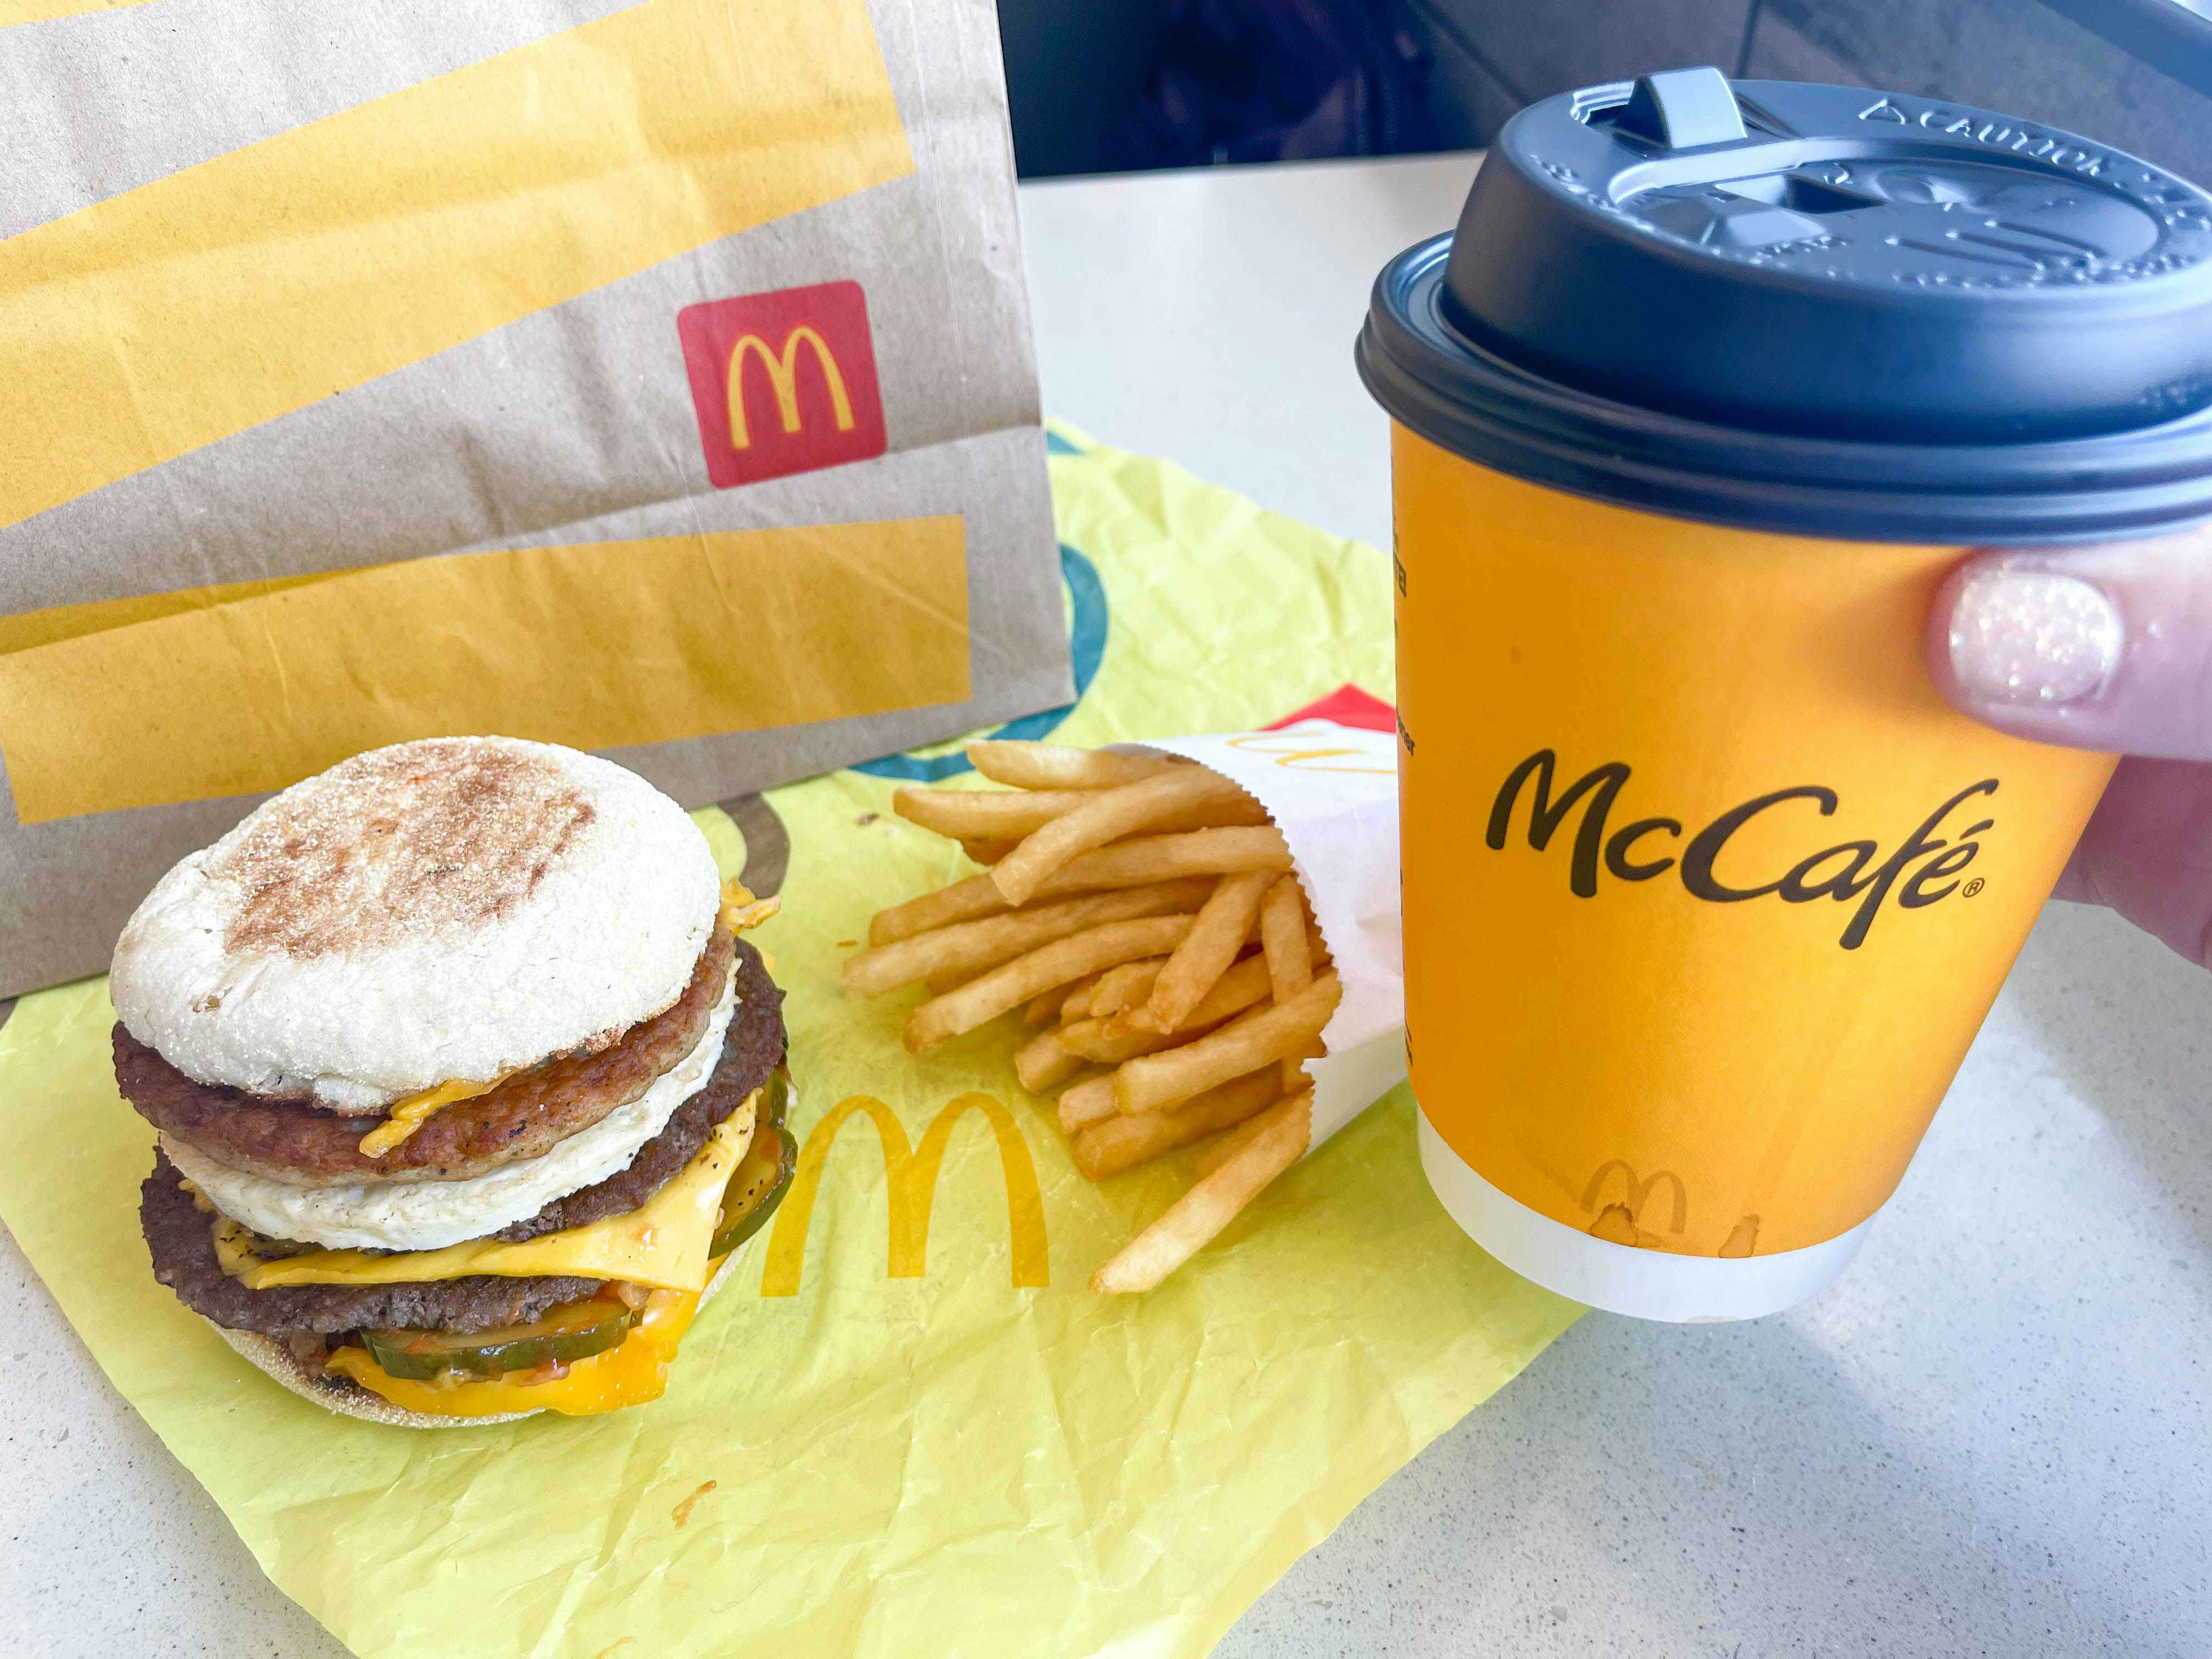 mcdonalds secret menu mcmuffin wand freis on table with mccafe coffee being held 